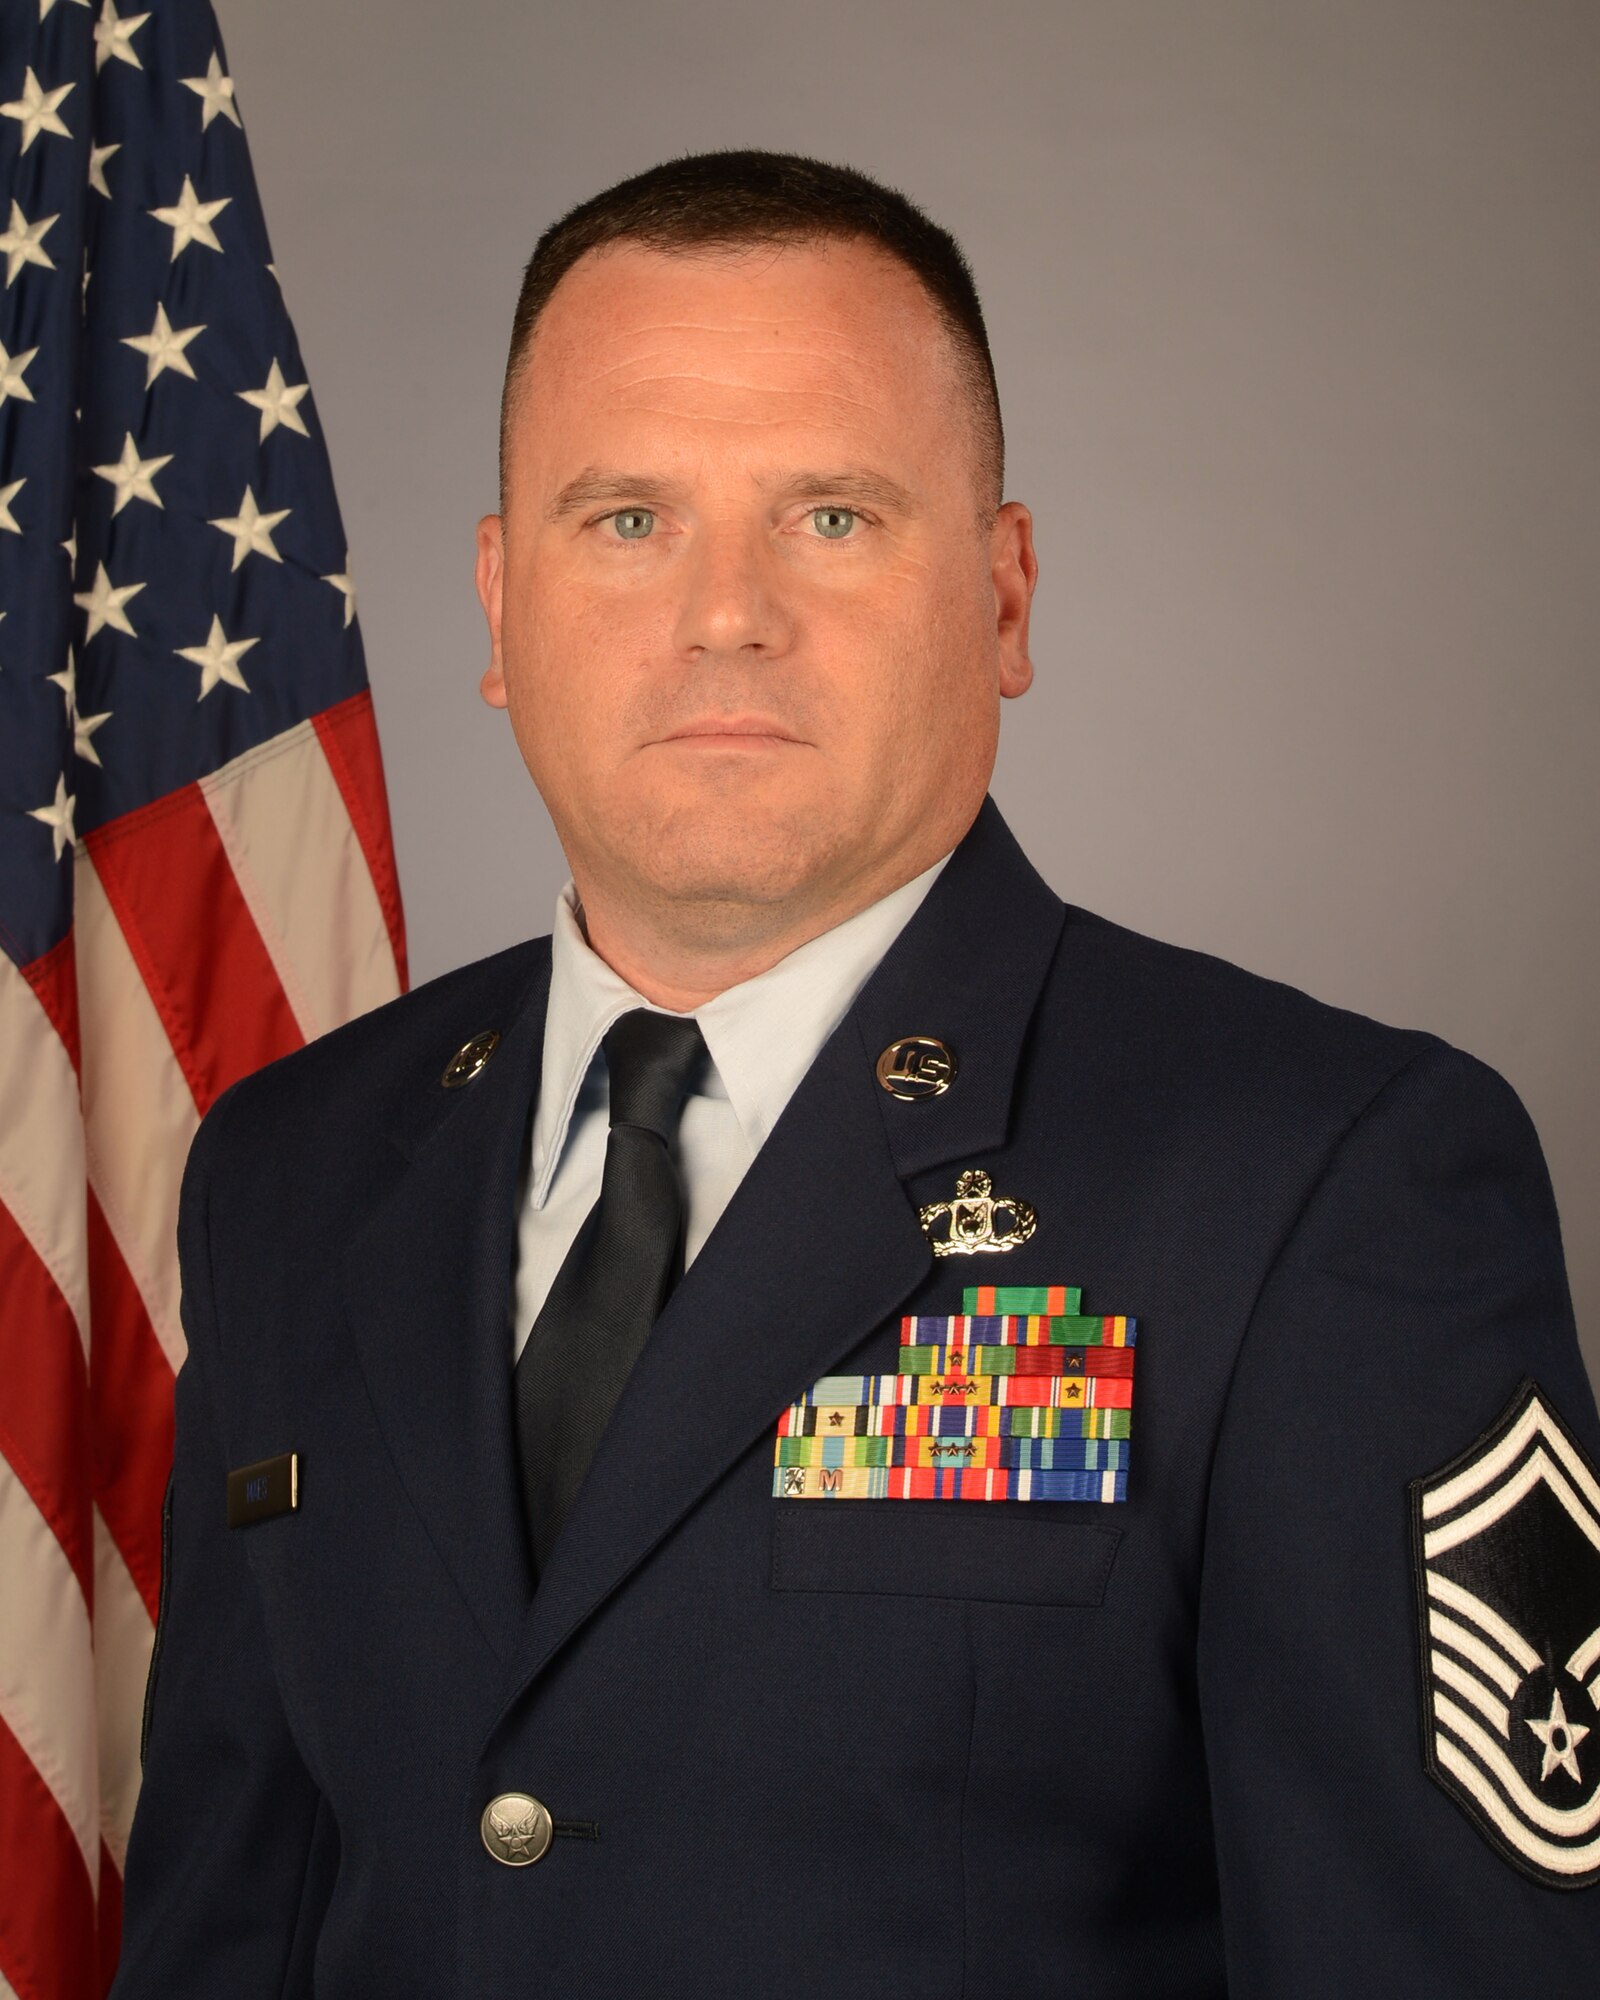 U.S. Air Force Senior Master Sgt. Peter Maes, South Carolina Air National Guard Joint Forces Headquarters first sergeant, August 10, 2021. (U.S. Air National Guard photo by Lt. Col. James St. Clair, 169th Fighter Wing Public Affairs)